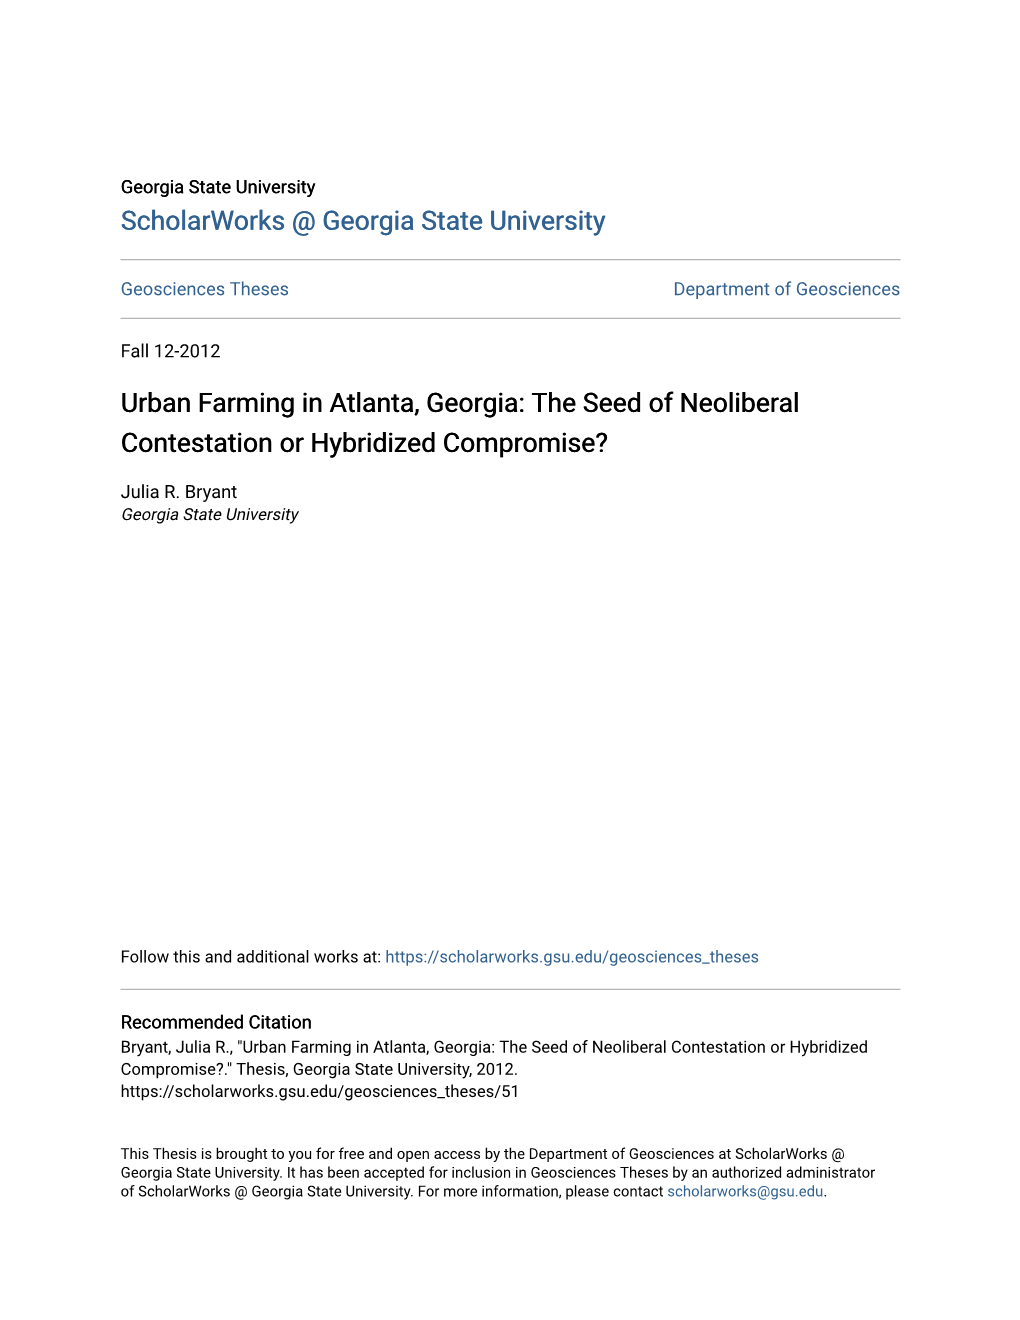 Urban Farming in Atlanta, Georgia: the Seed of Neoliberal Contestation Or Hybridized Compromise?